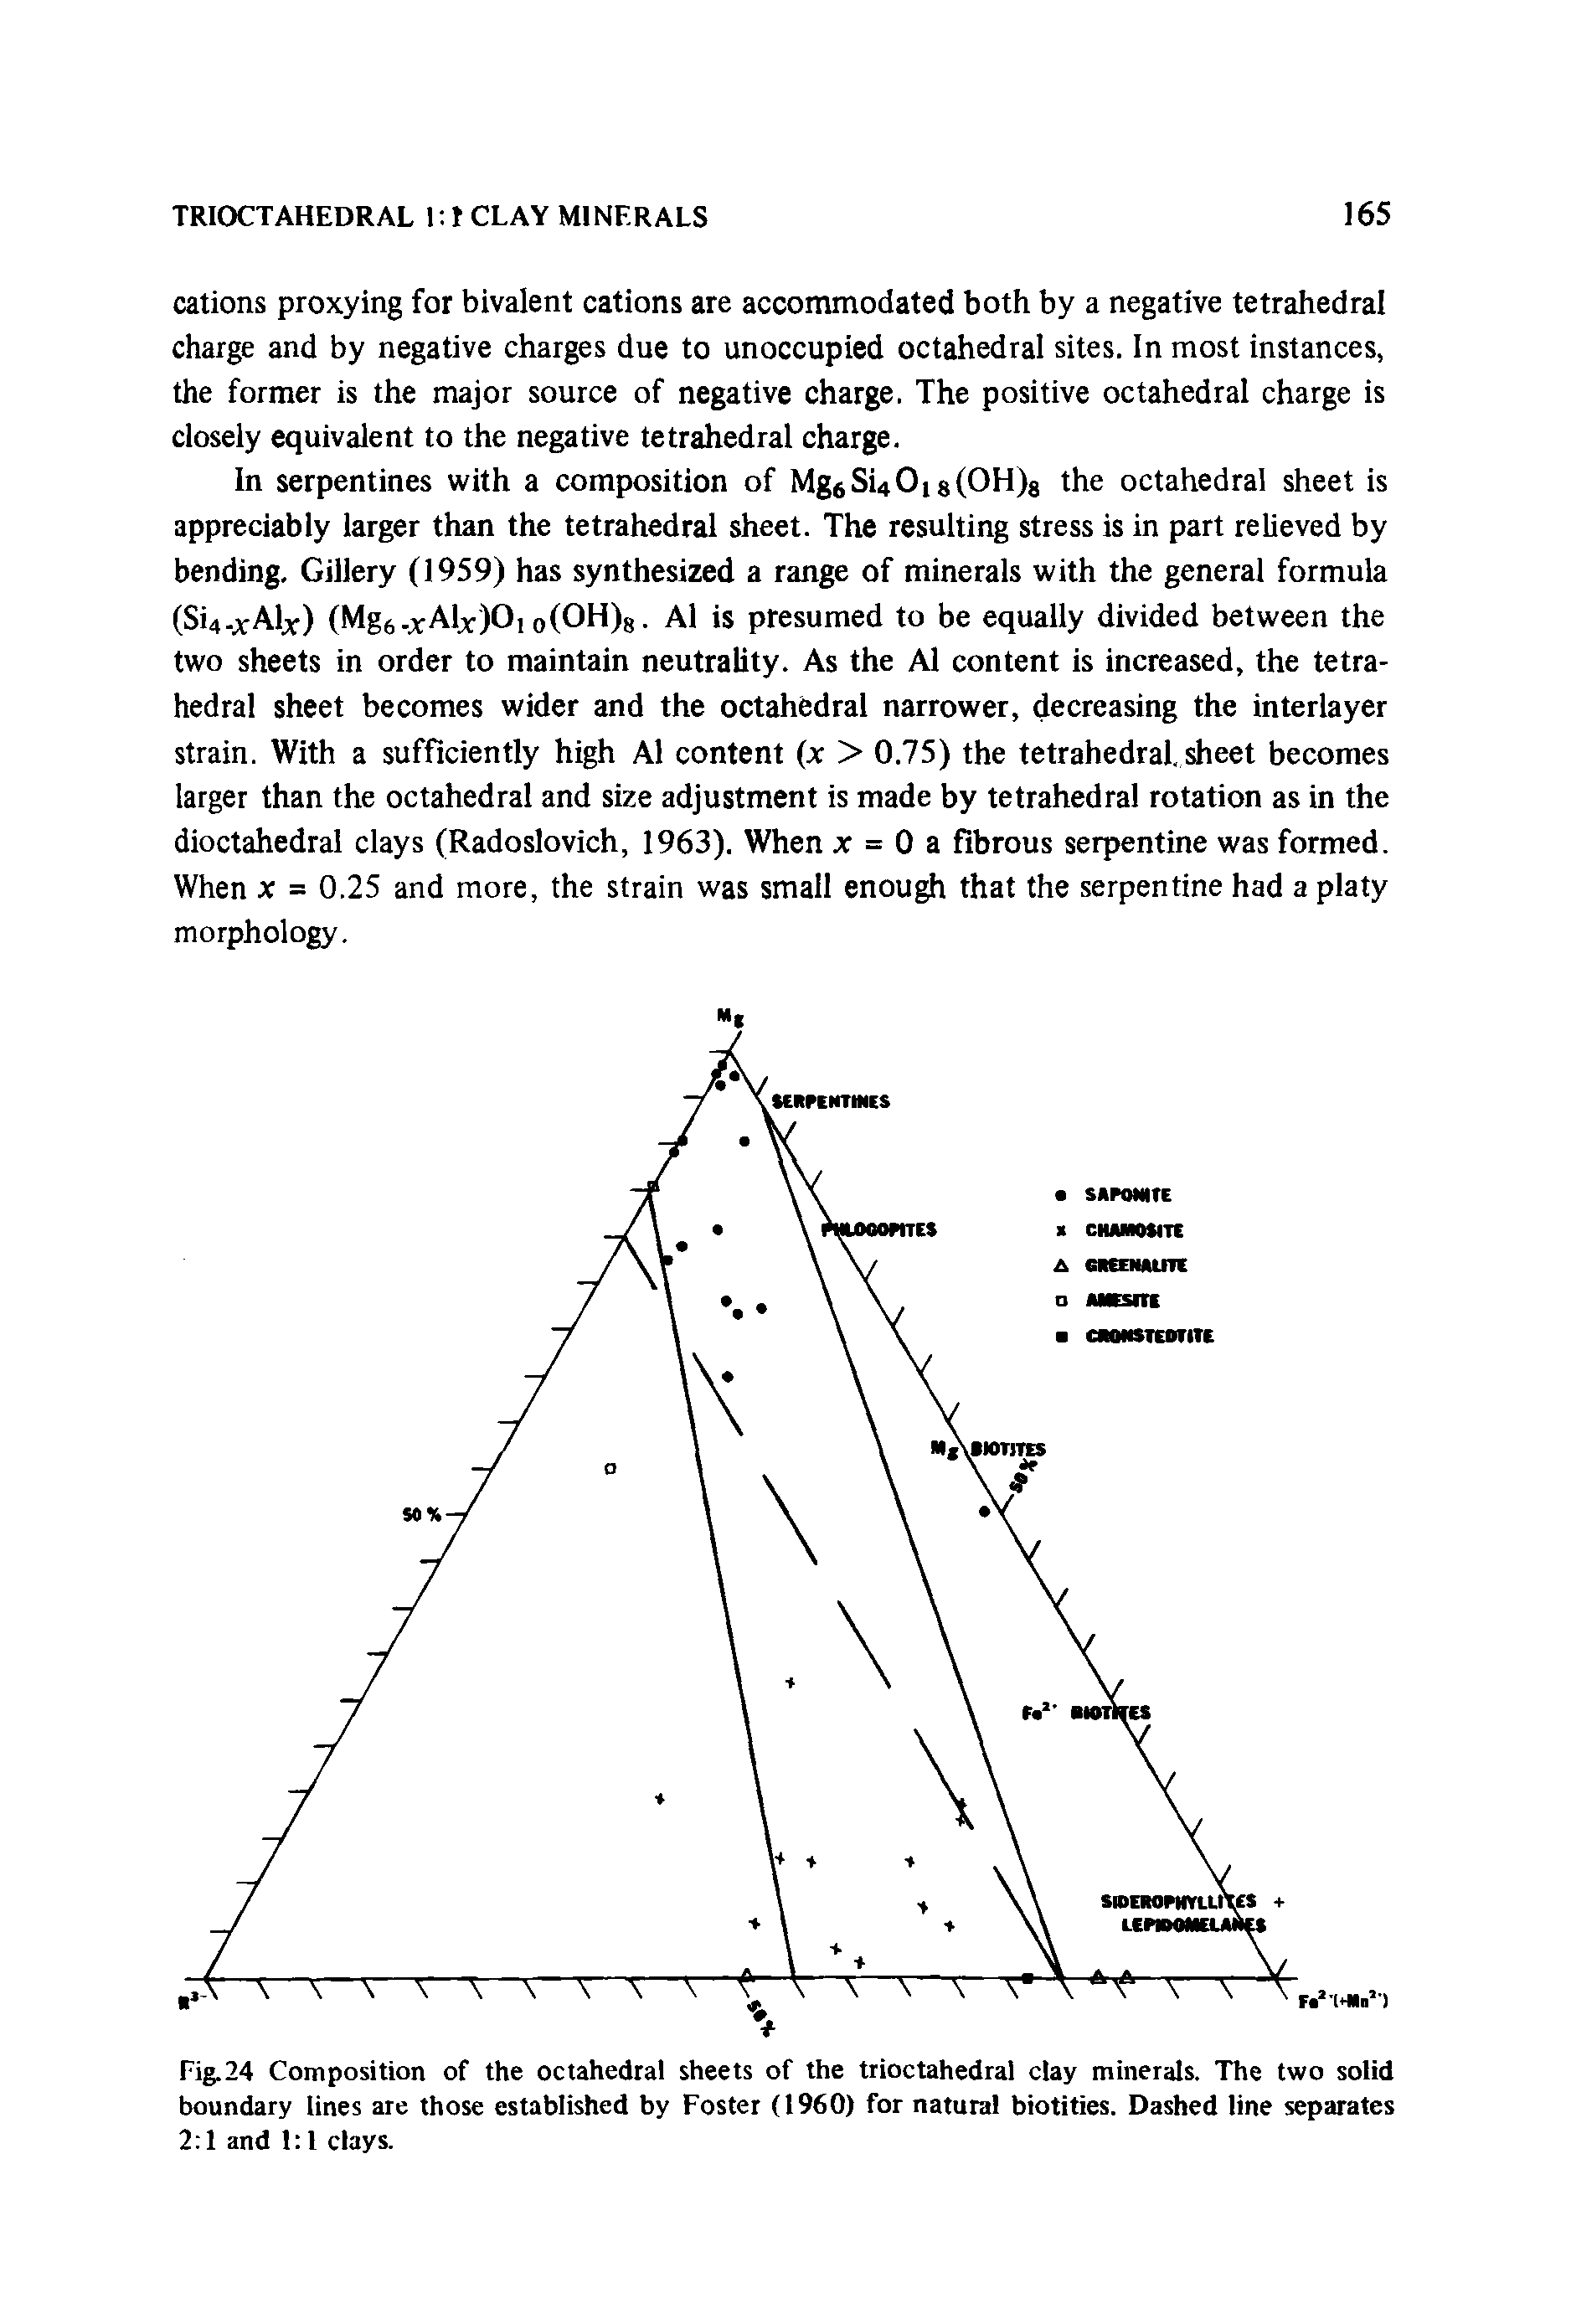 Fig.24 Composition of the octahedral sheets of the trioctahedral clay minerals. The two solid boundary lines are those established by Foster (1960) for natural biotities. Dashed line separates 2 1 and 1 1 clays.